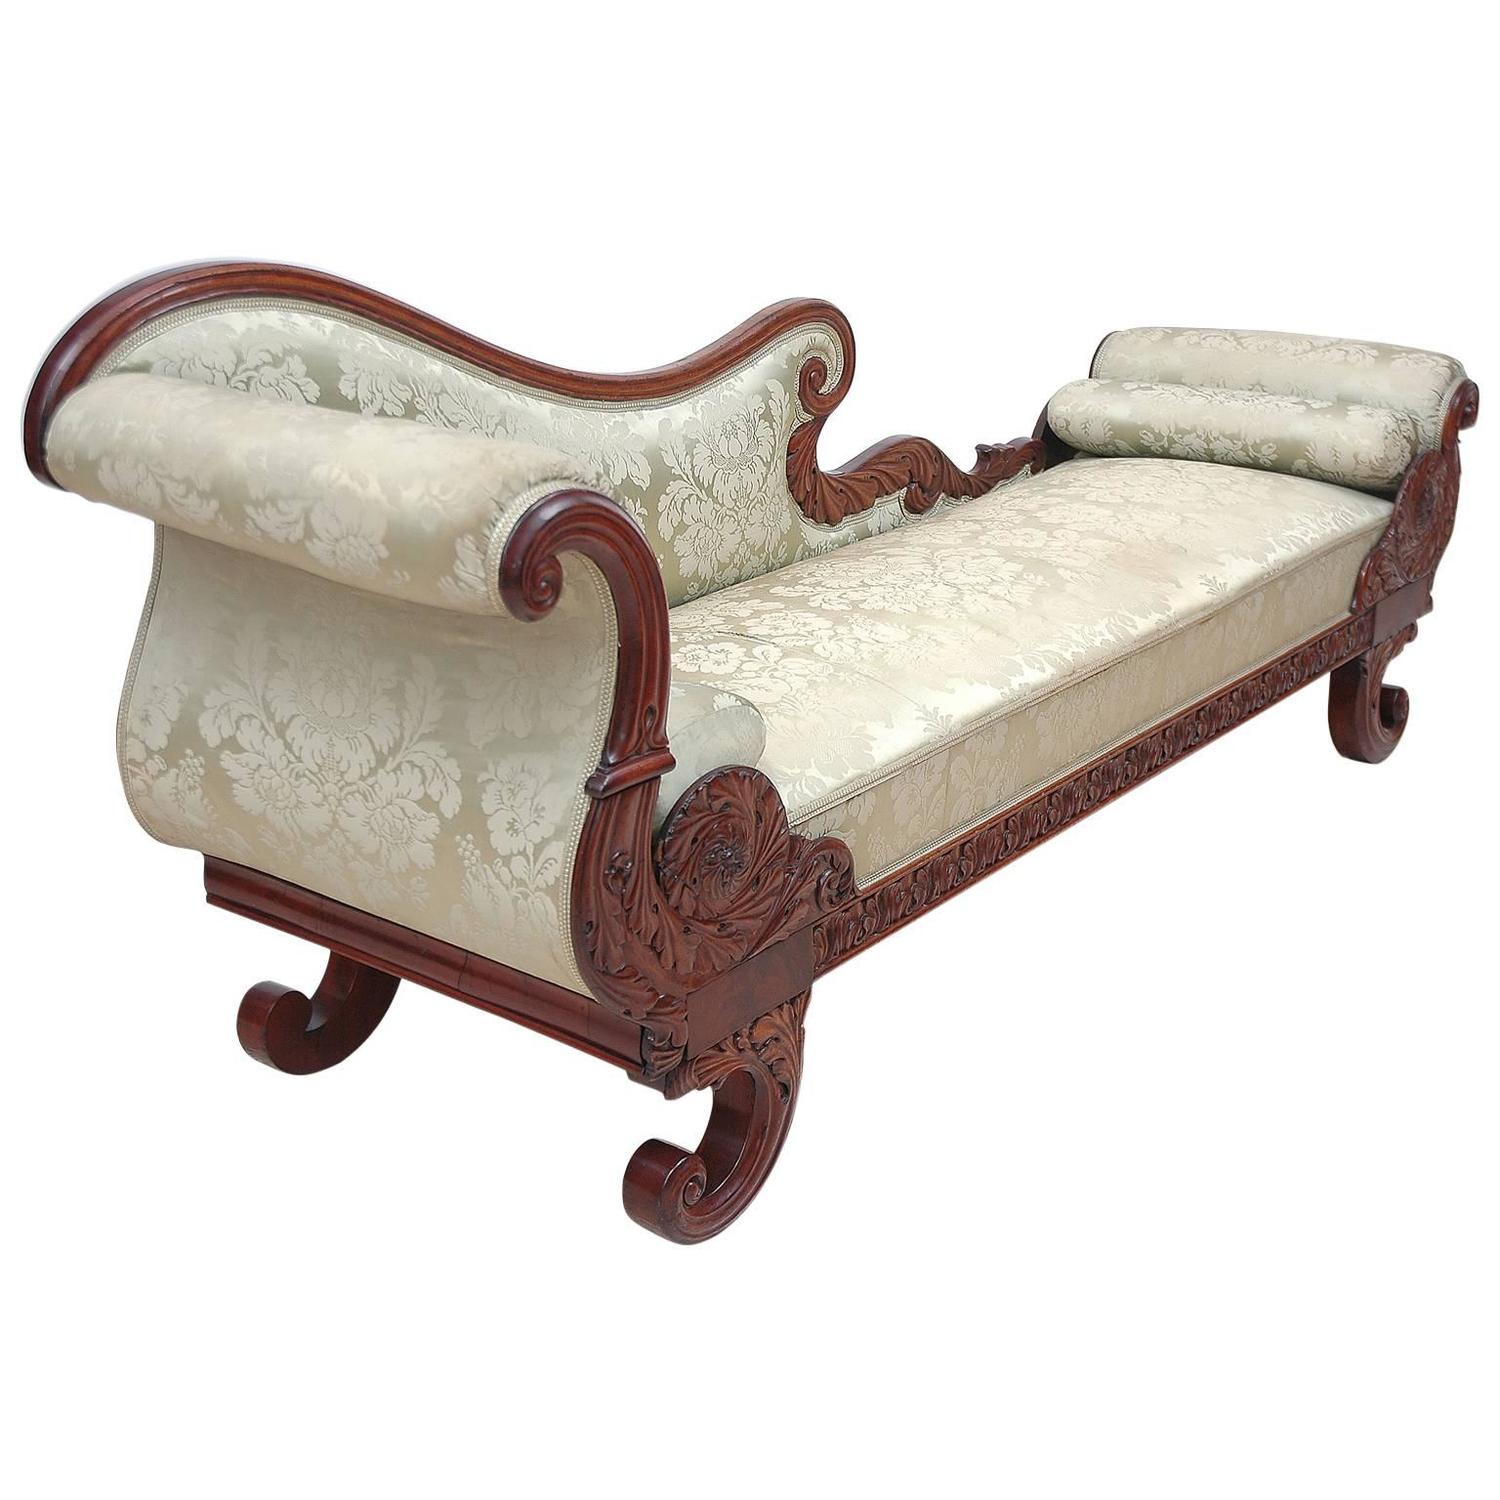 19th Century Empire Recamier Or Fainting Couch In Mahogany With